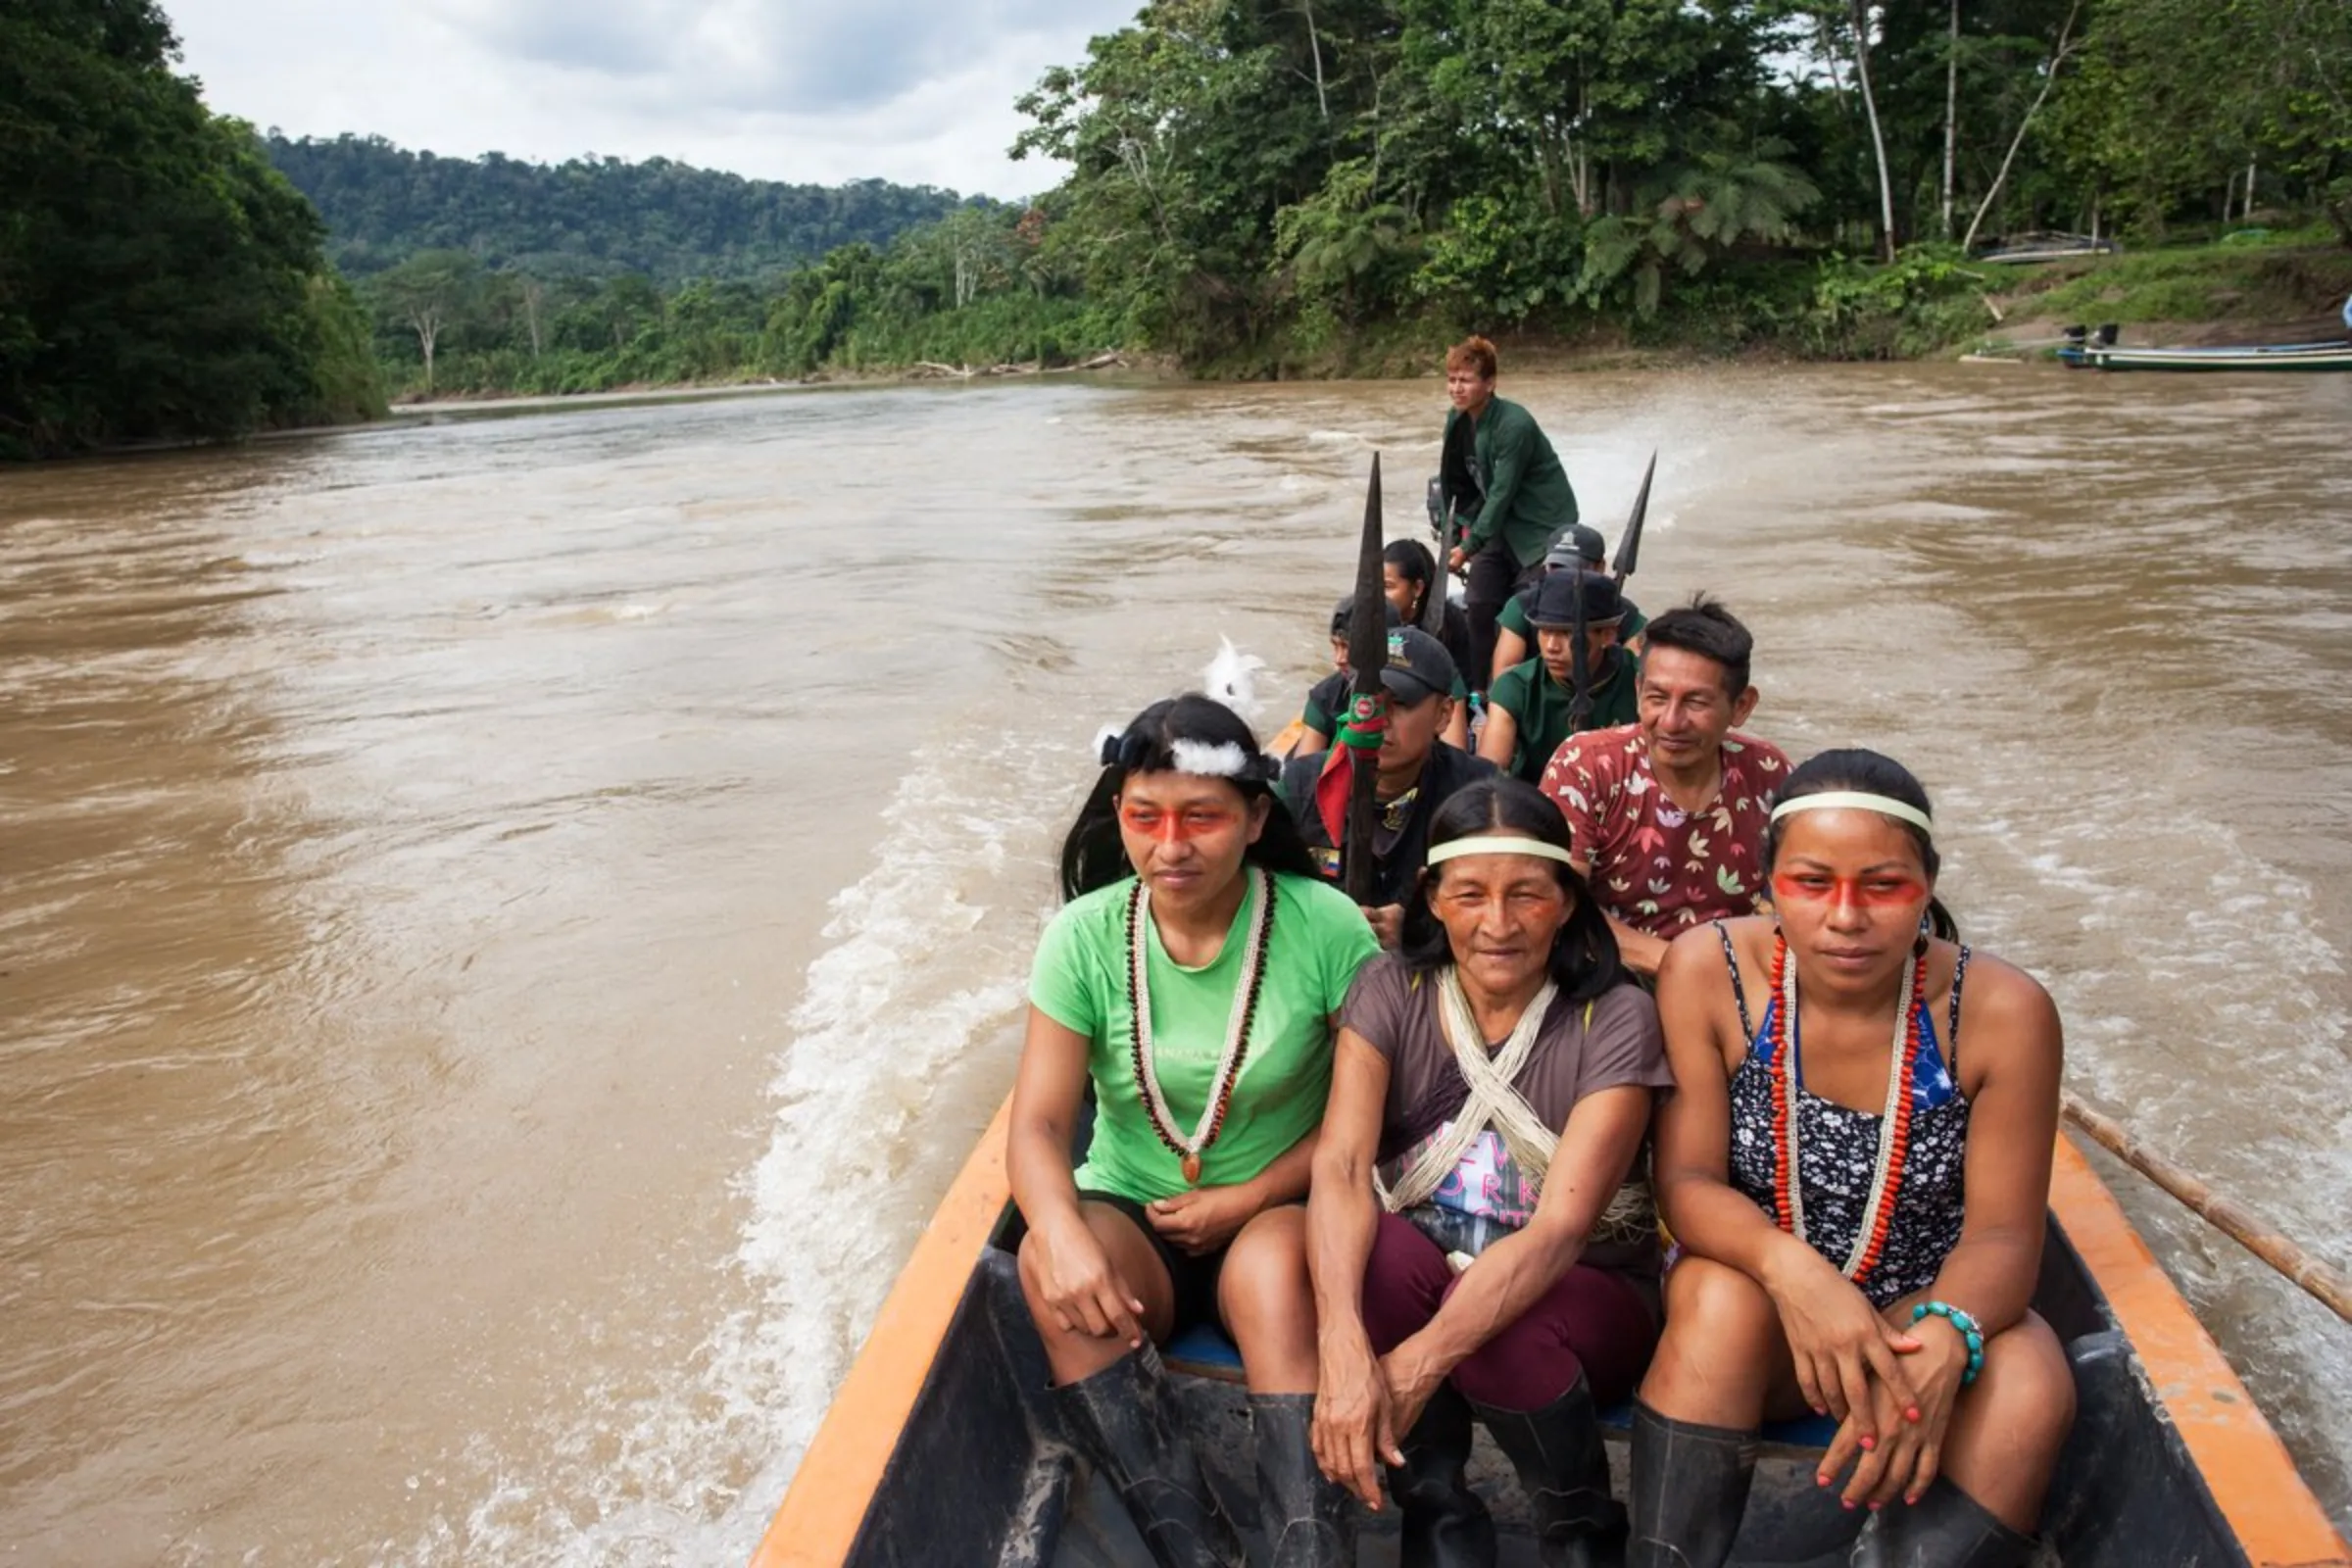 Silvana Nihua, president of the Waorani Organization of Pastaza (OWAP), travels along Curaray River with members of the Waorani and Cofan indigenous groups in the Amazon province of Pastaza, Ecuador, on April 25, 2022